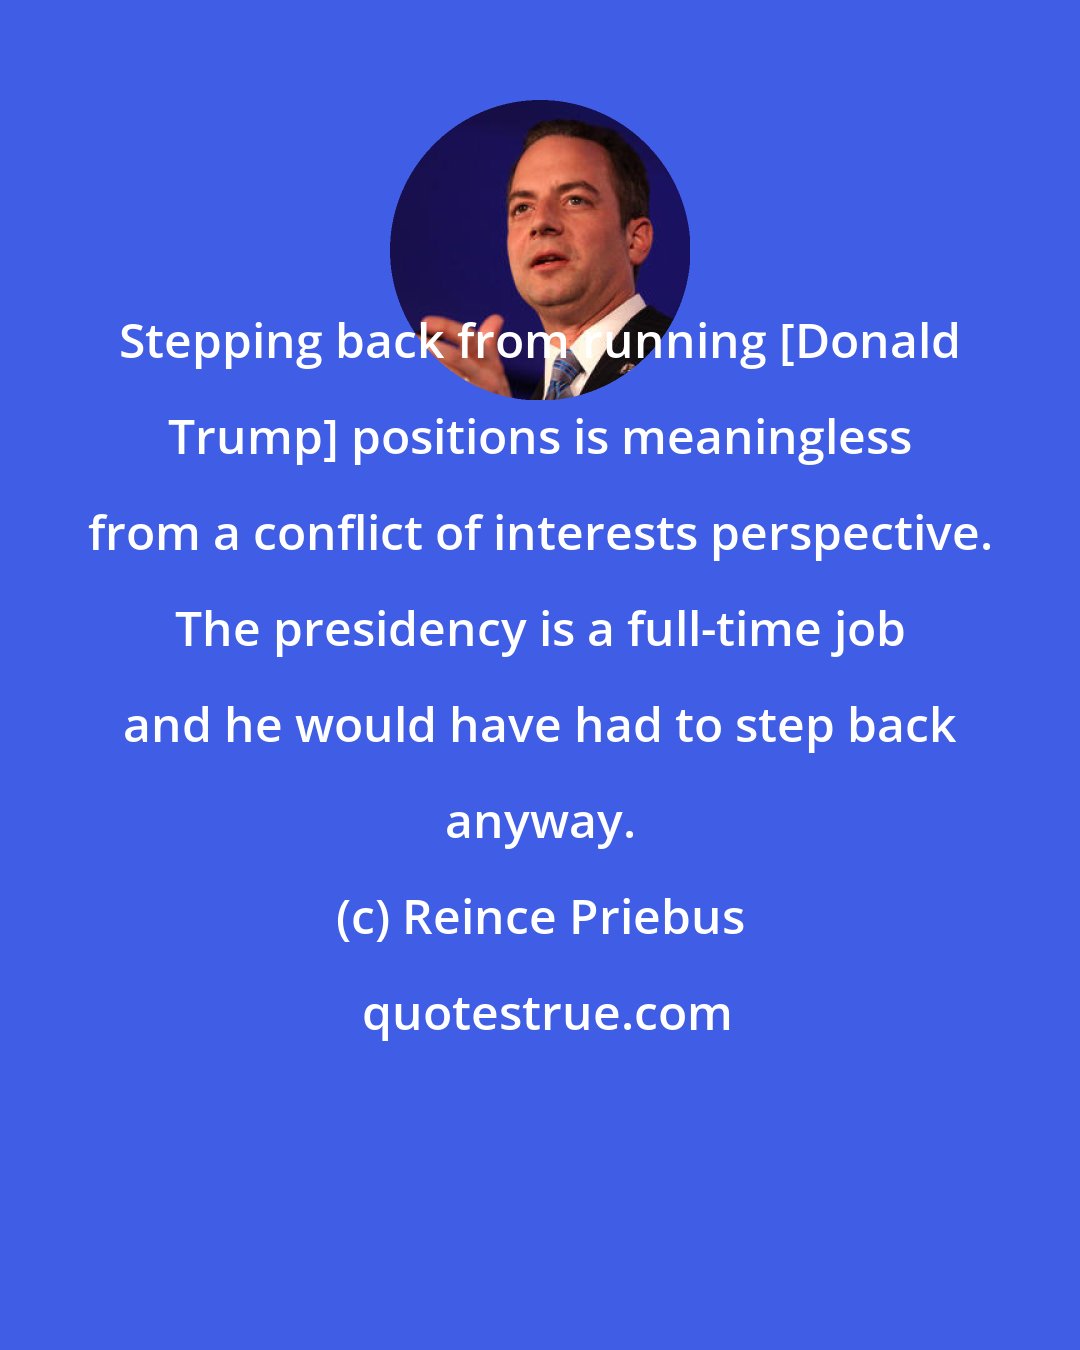 Reince Priebus: Stepping back from running [Donald Trump] positions is meaningless from a conflict of interests perspective. The presidency is a full-time job and he would have had to step back anyway.